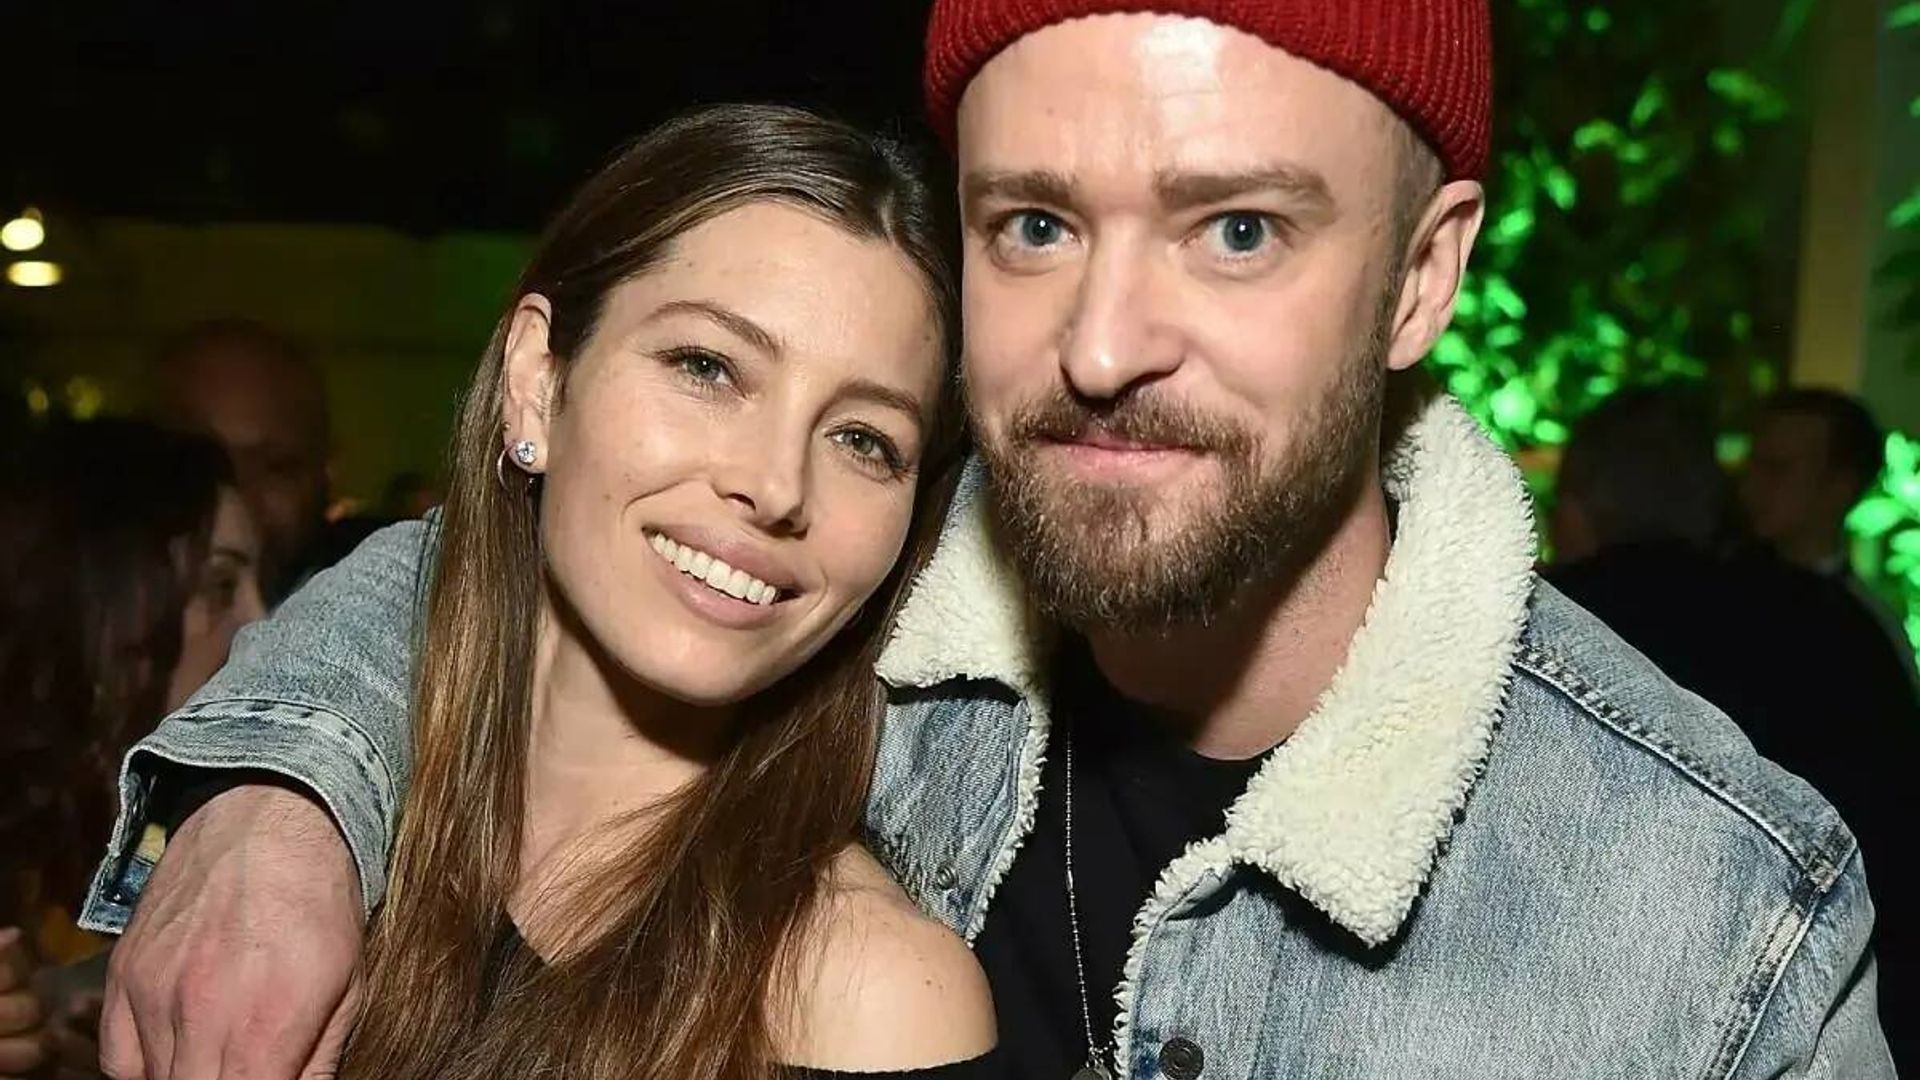 Jessica Biel delights fans with photos from Disneyland adventure with son Silas